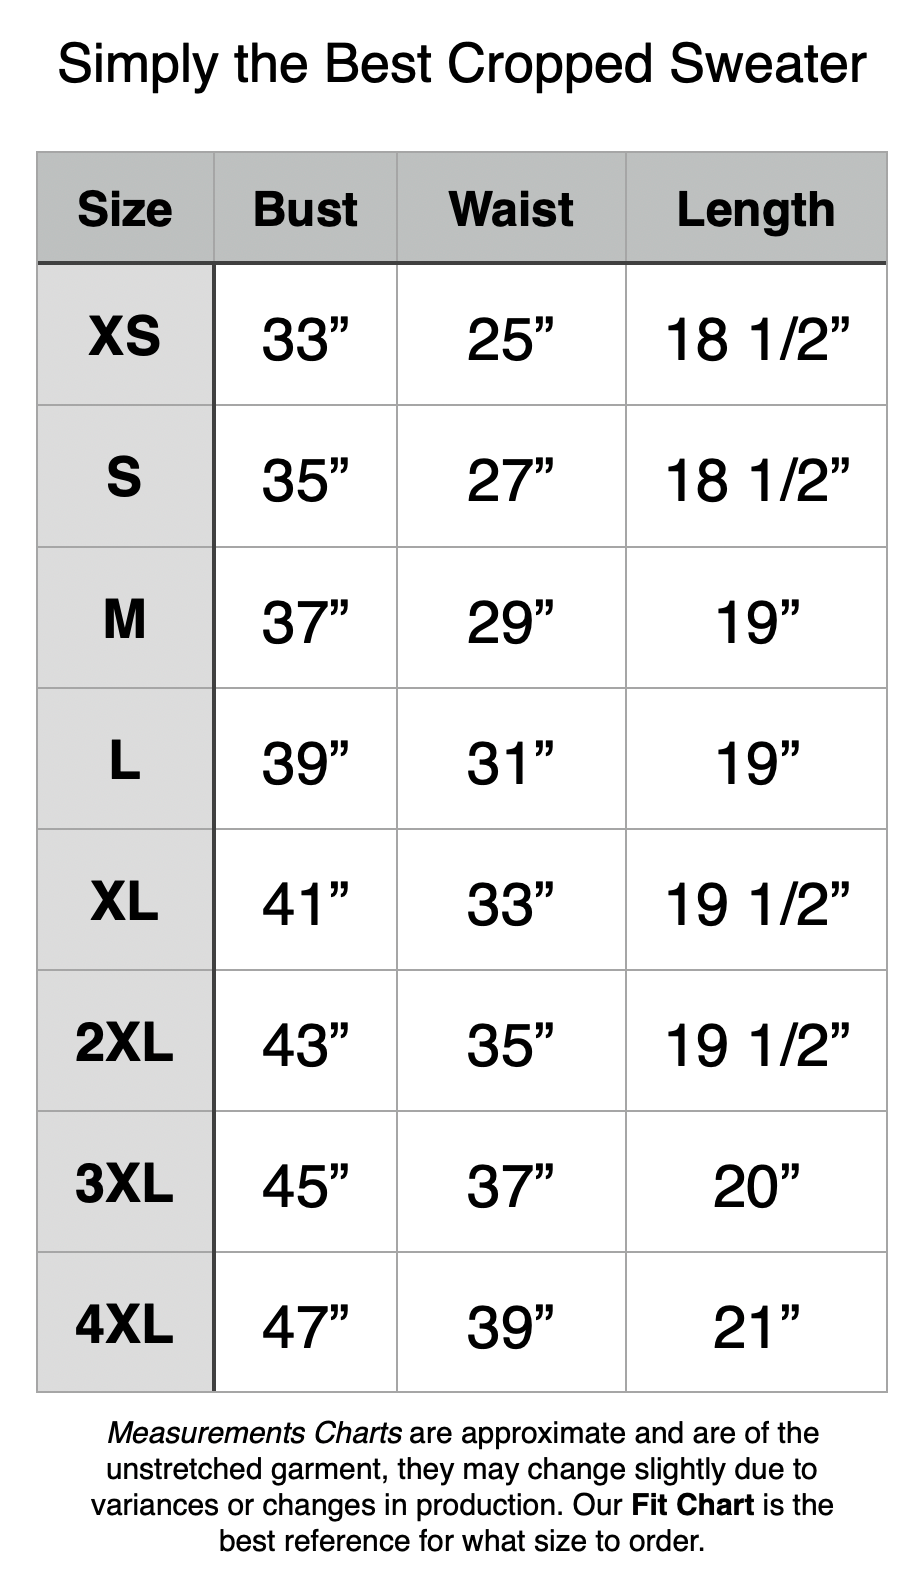 Simply the Best Cropped Sweater: XS - 33" Bust, 25" Waist, 18.5" Length. S - 35" Bust, 27" Waist, 18.5" Length. M - 37" Bust, 29" Waist, 19" Length. L - 39" Bust, 31" Waist, 19" Length. XL - 41" Bust, 33" Waist, 19.5" Length. 2XL - 43" Bust, 35" Waist, 19.5" Length. 3XL - 45" Bust, 37" Waist, 20" Length. 4XL - 47" Bust, 39" Waist, 21" Length.